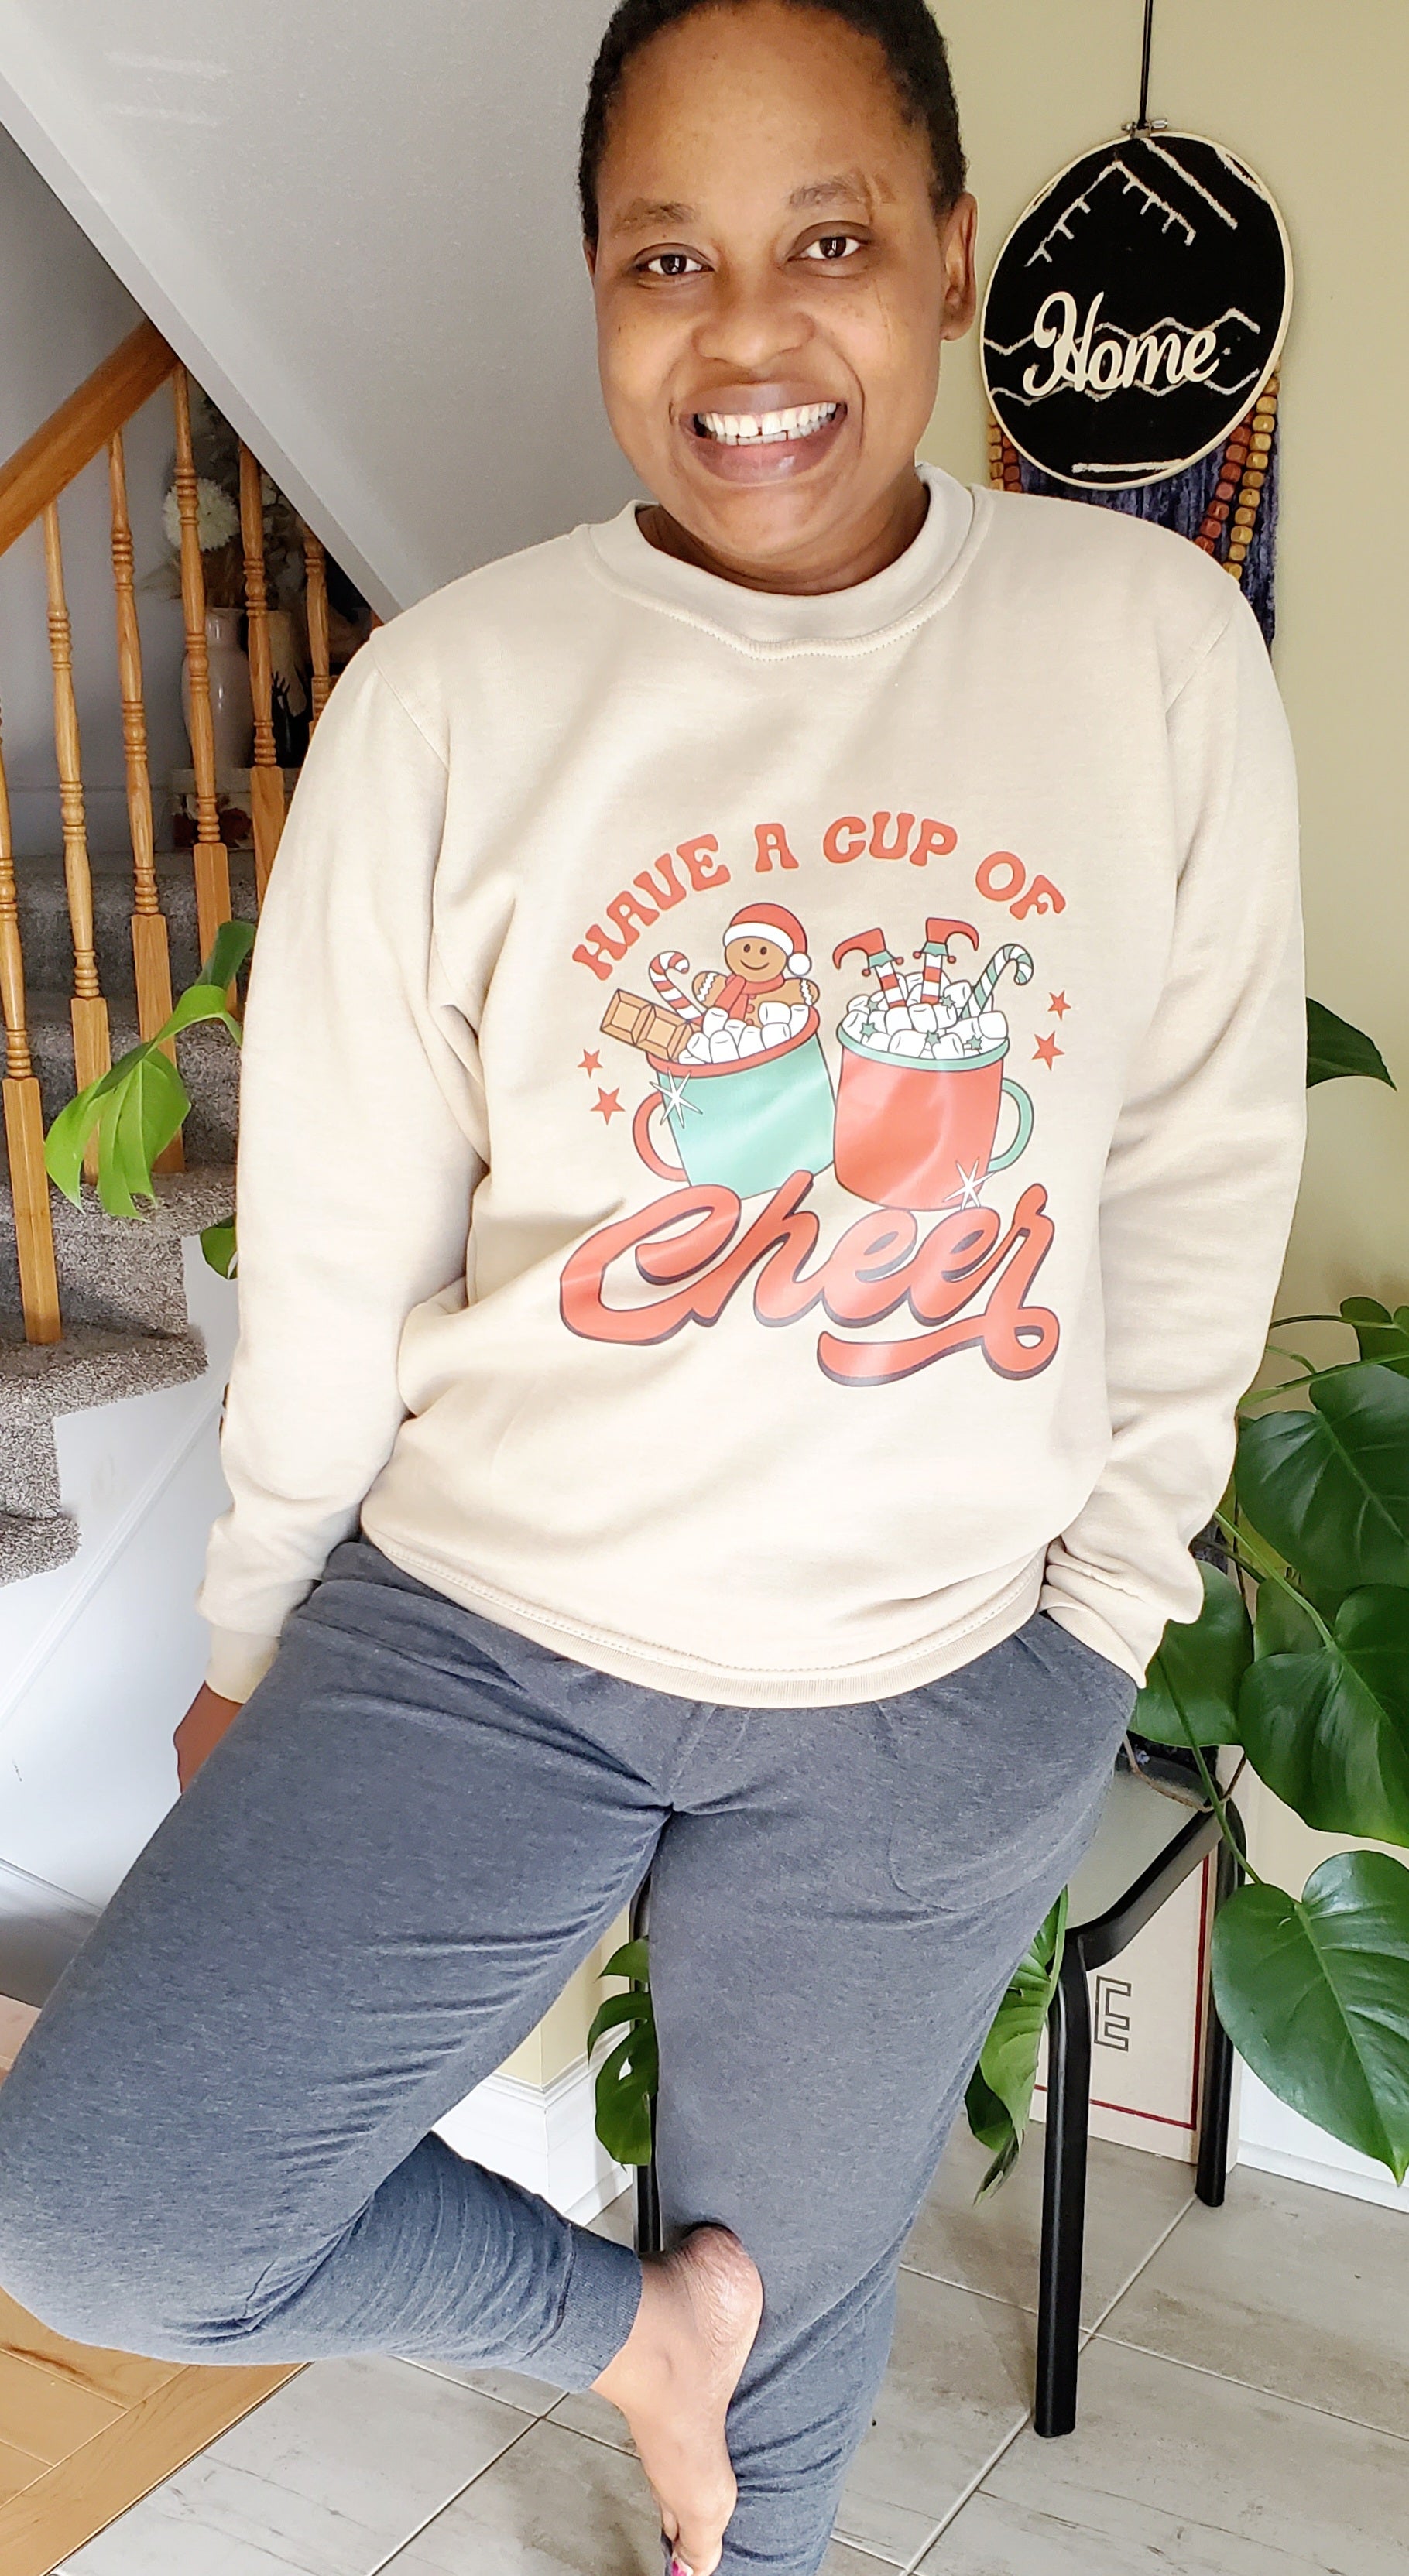 Have a cup of cheer - Sweatshirt